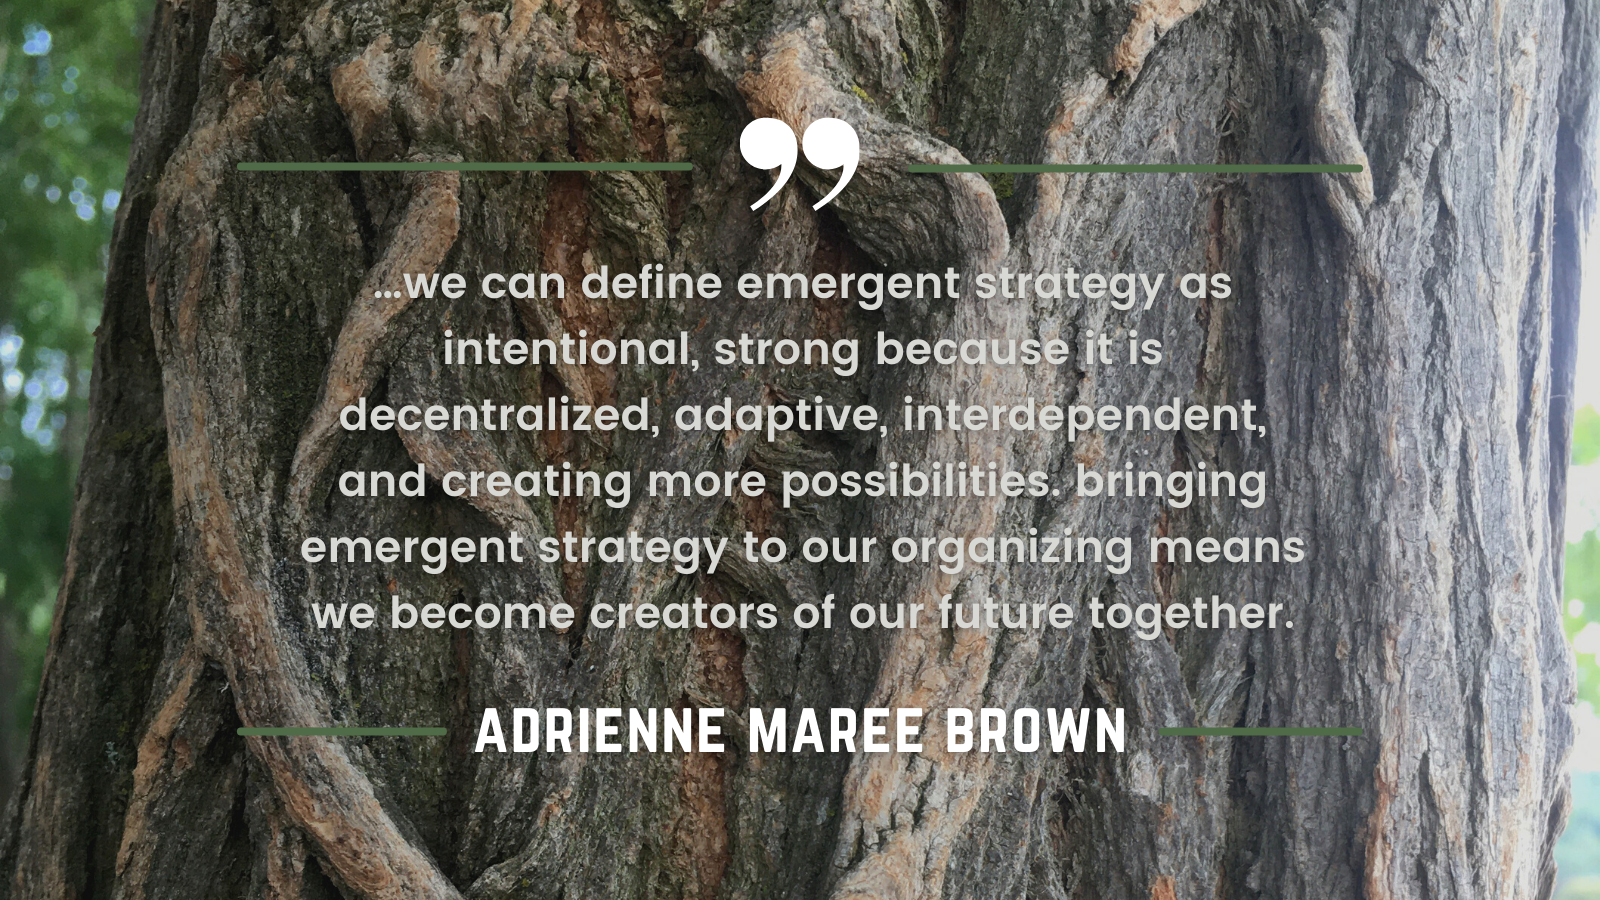 background is over tree with thick brown bark and green behind truck, quote is written "...we can define emergent strategy as intentional, strong because it is decentralized, adaptive, interdependent, and creating more possibilities. bring emergent strategy to our organizing means we become creators of our future together." - adrienne maree brown